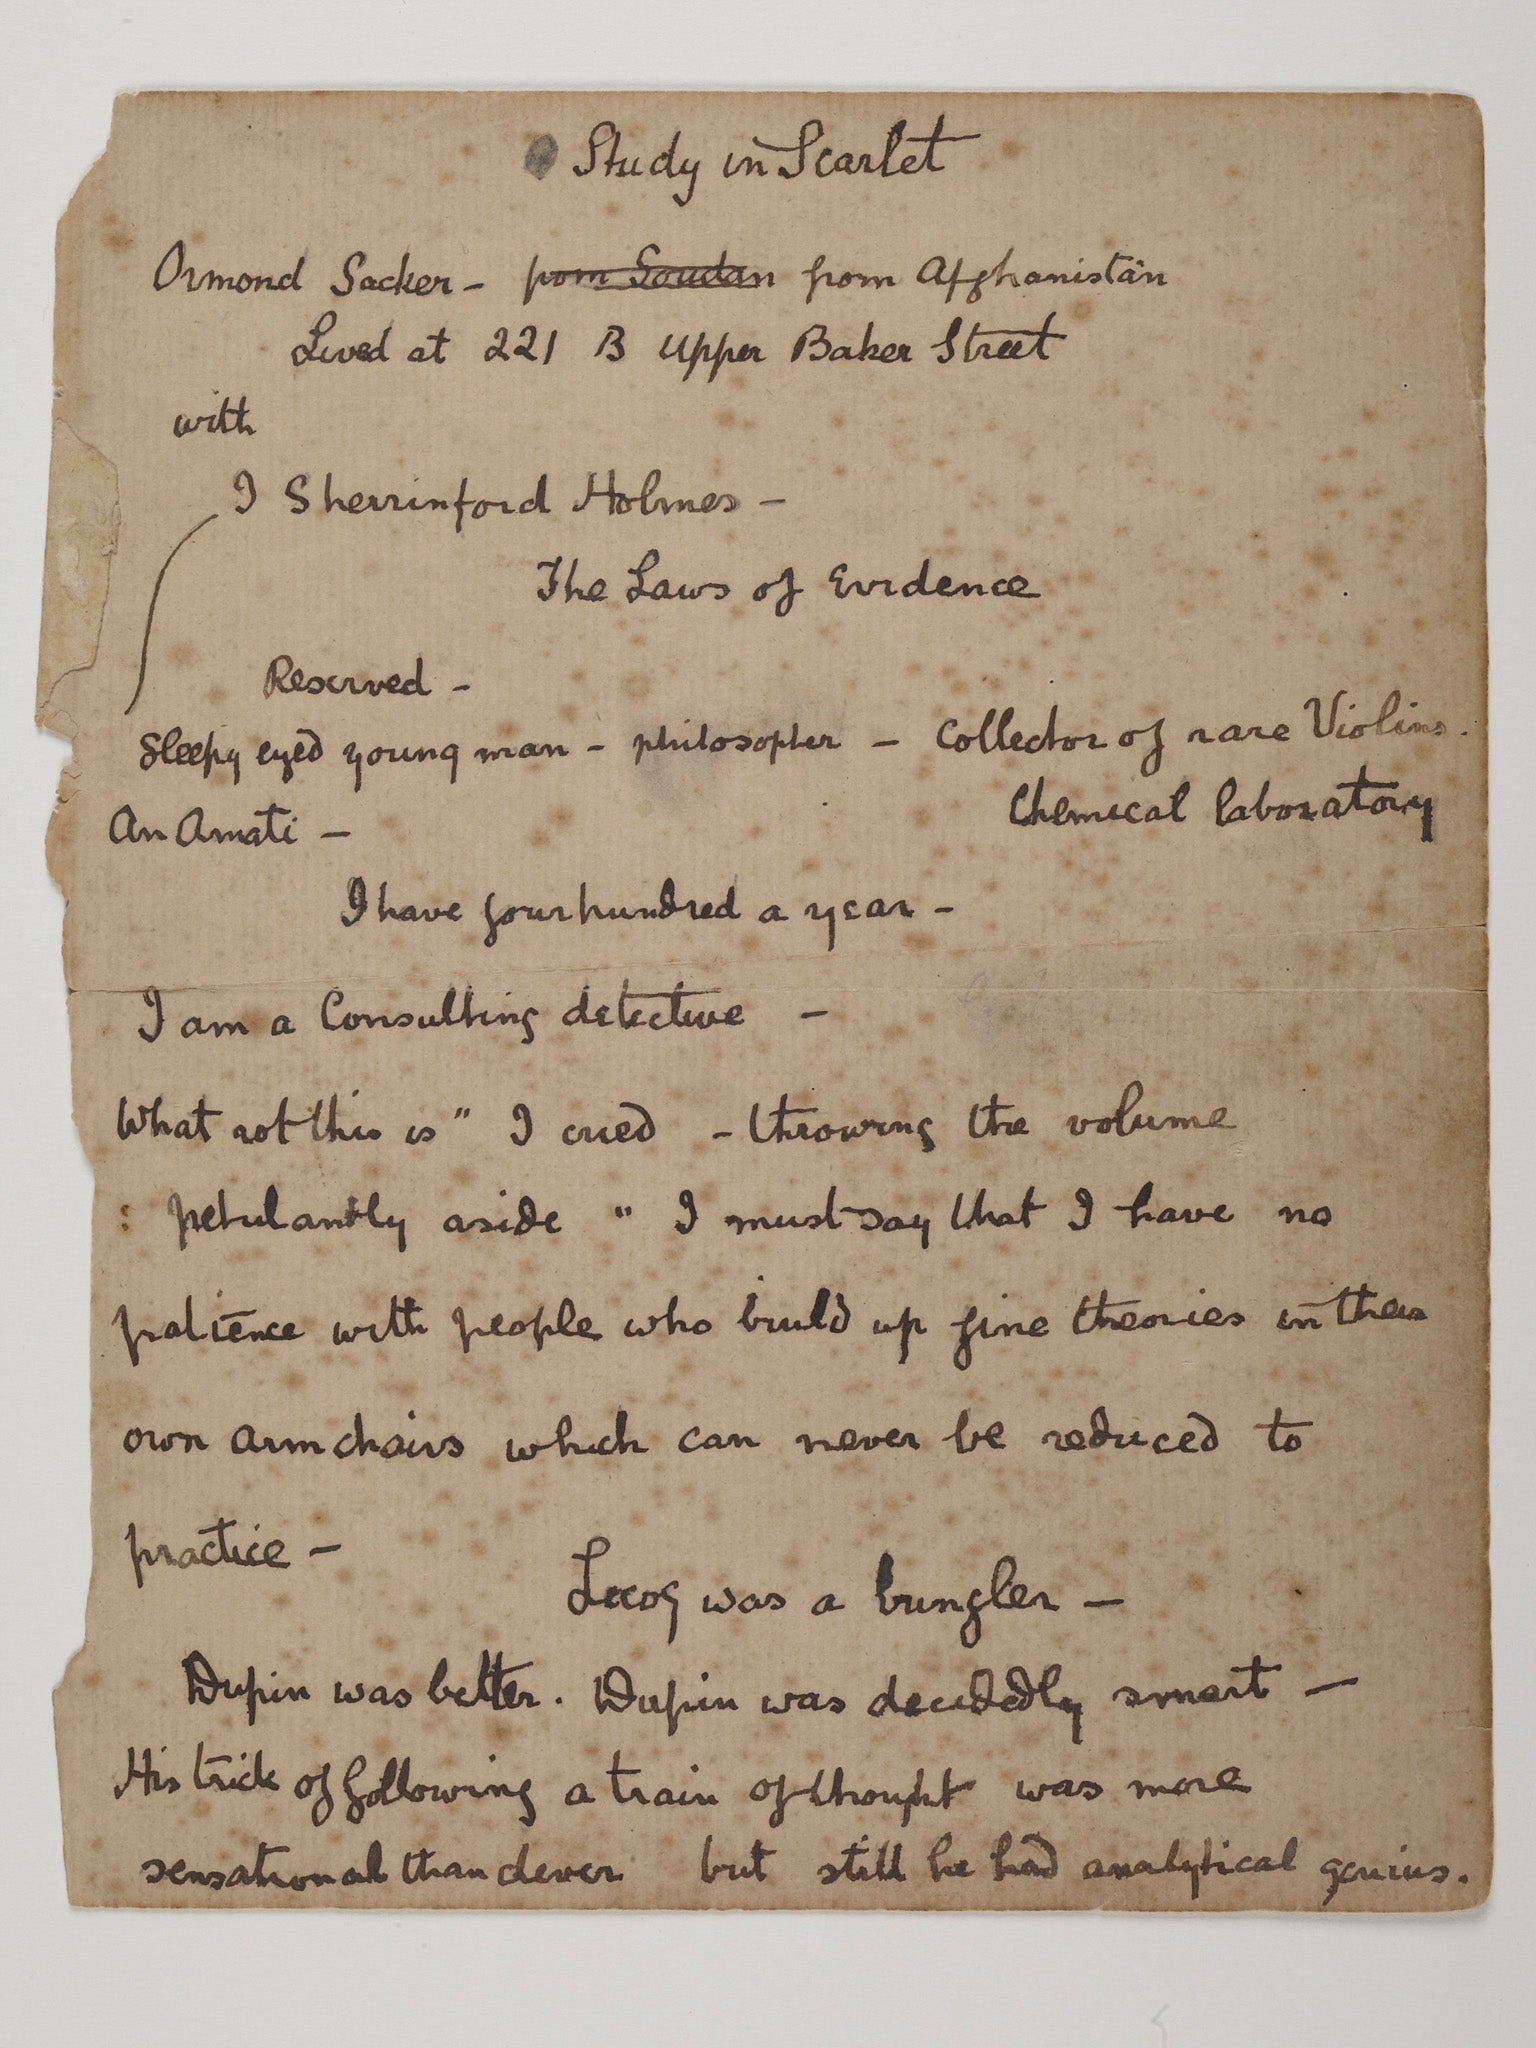 A Study in Scarlet manuscript notes by author Arthur Conan Doyle from 1886 